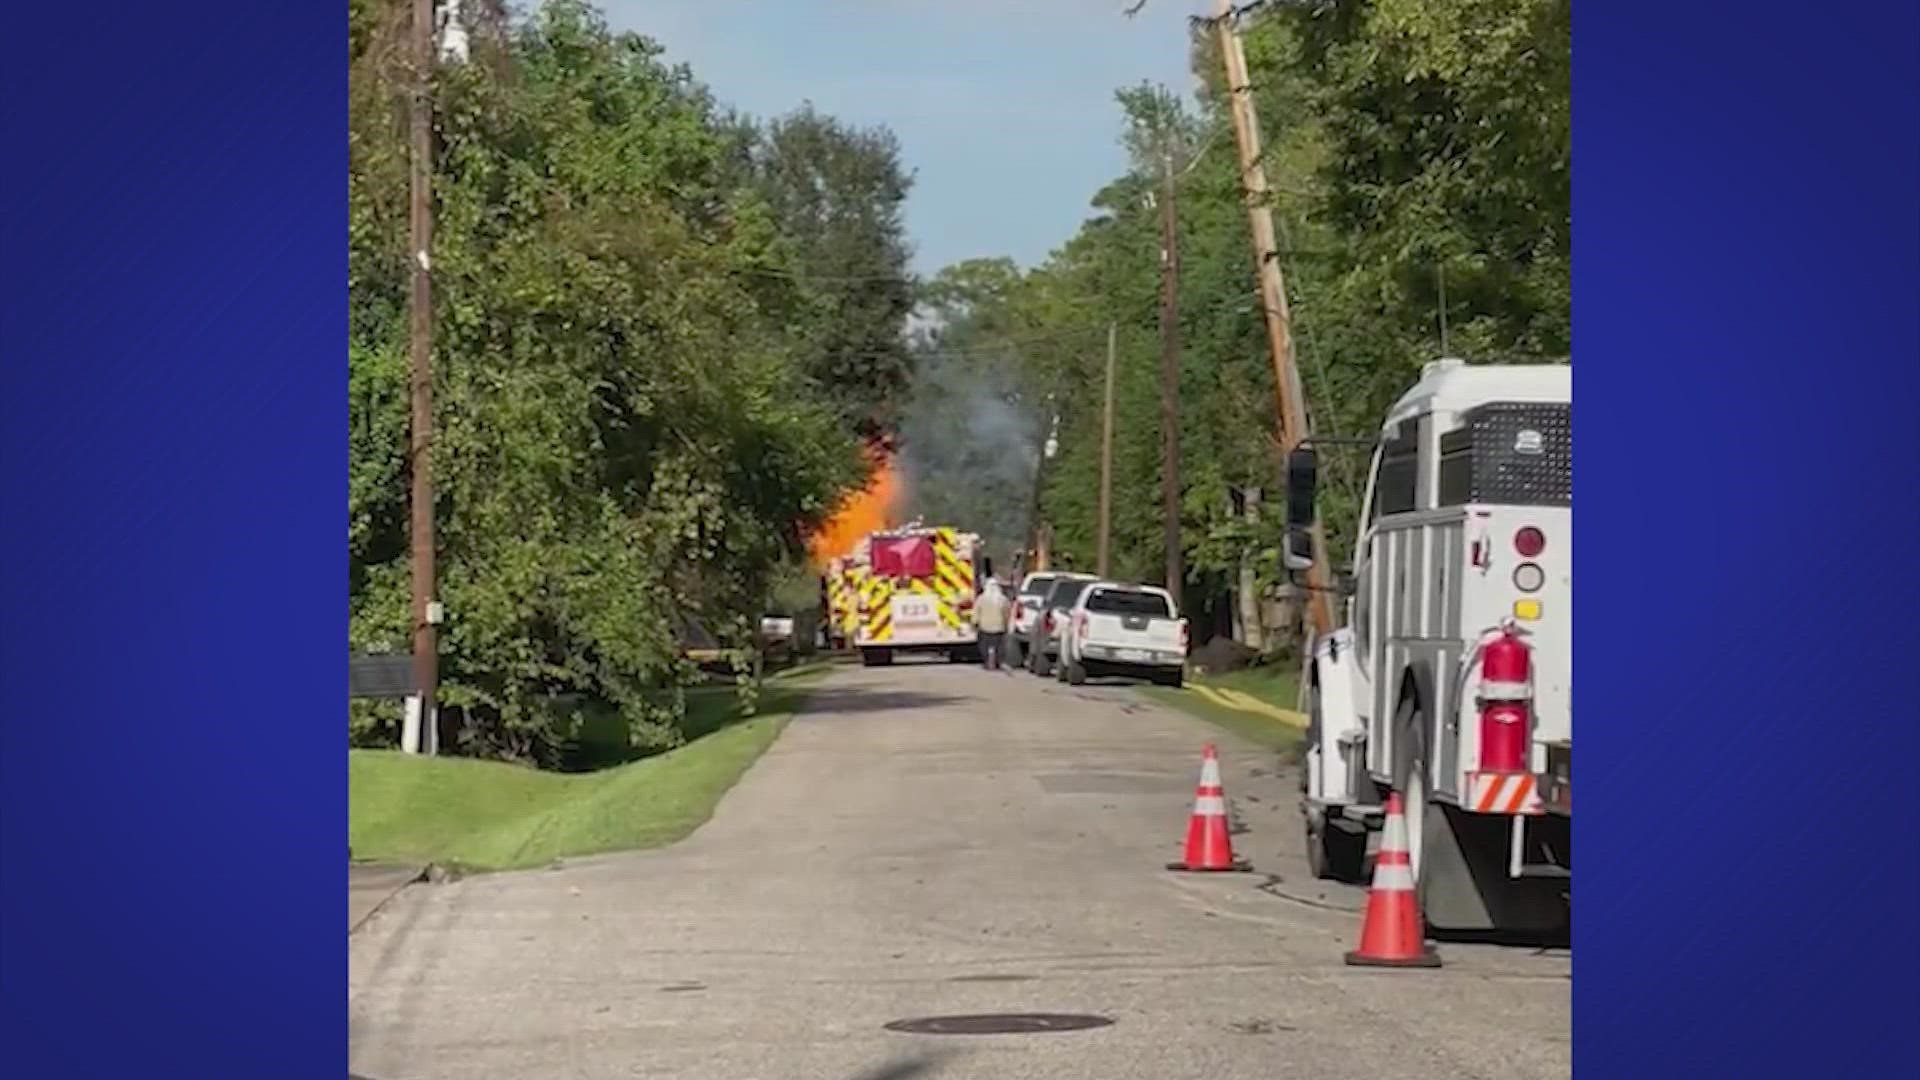 Gas and power were shut off on East Castlewood Drive due to the fire. Authorities said there was no immediate threat, but told people to avoid the area.